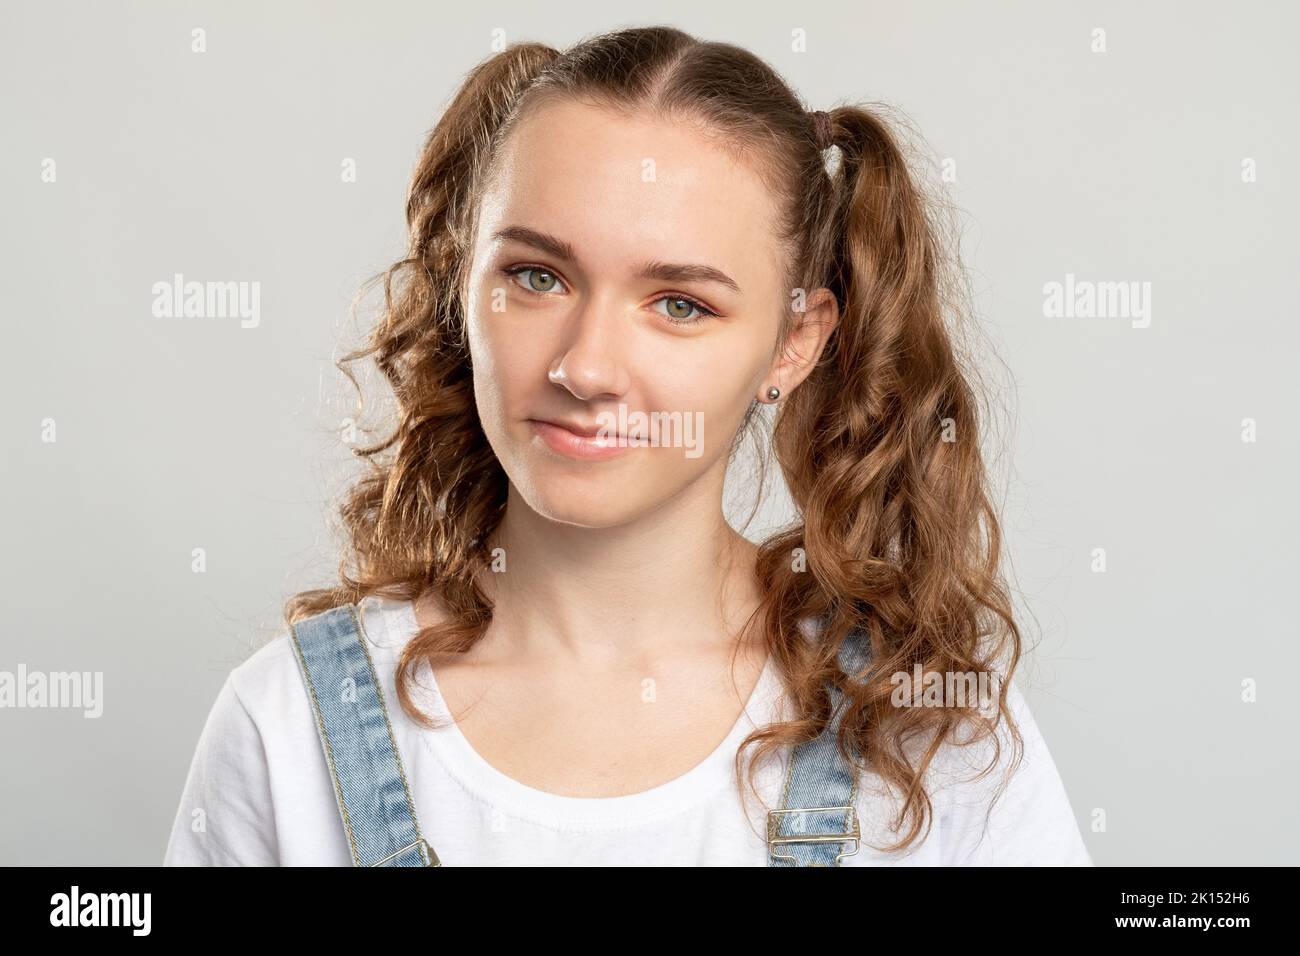 Teen girl portrait. Youth lifestyle. Happy woman with 2 ponytails cute hairstyle smiling isolated on neutral background. Tenderness beauty. Stock Photo